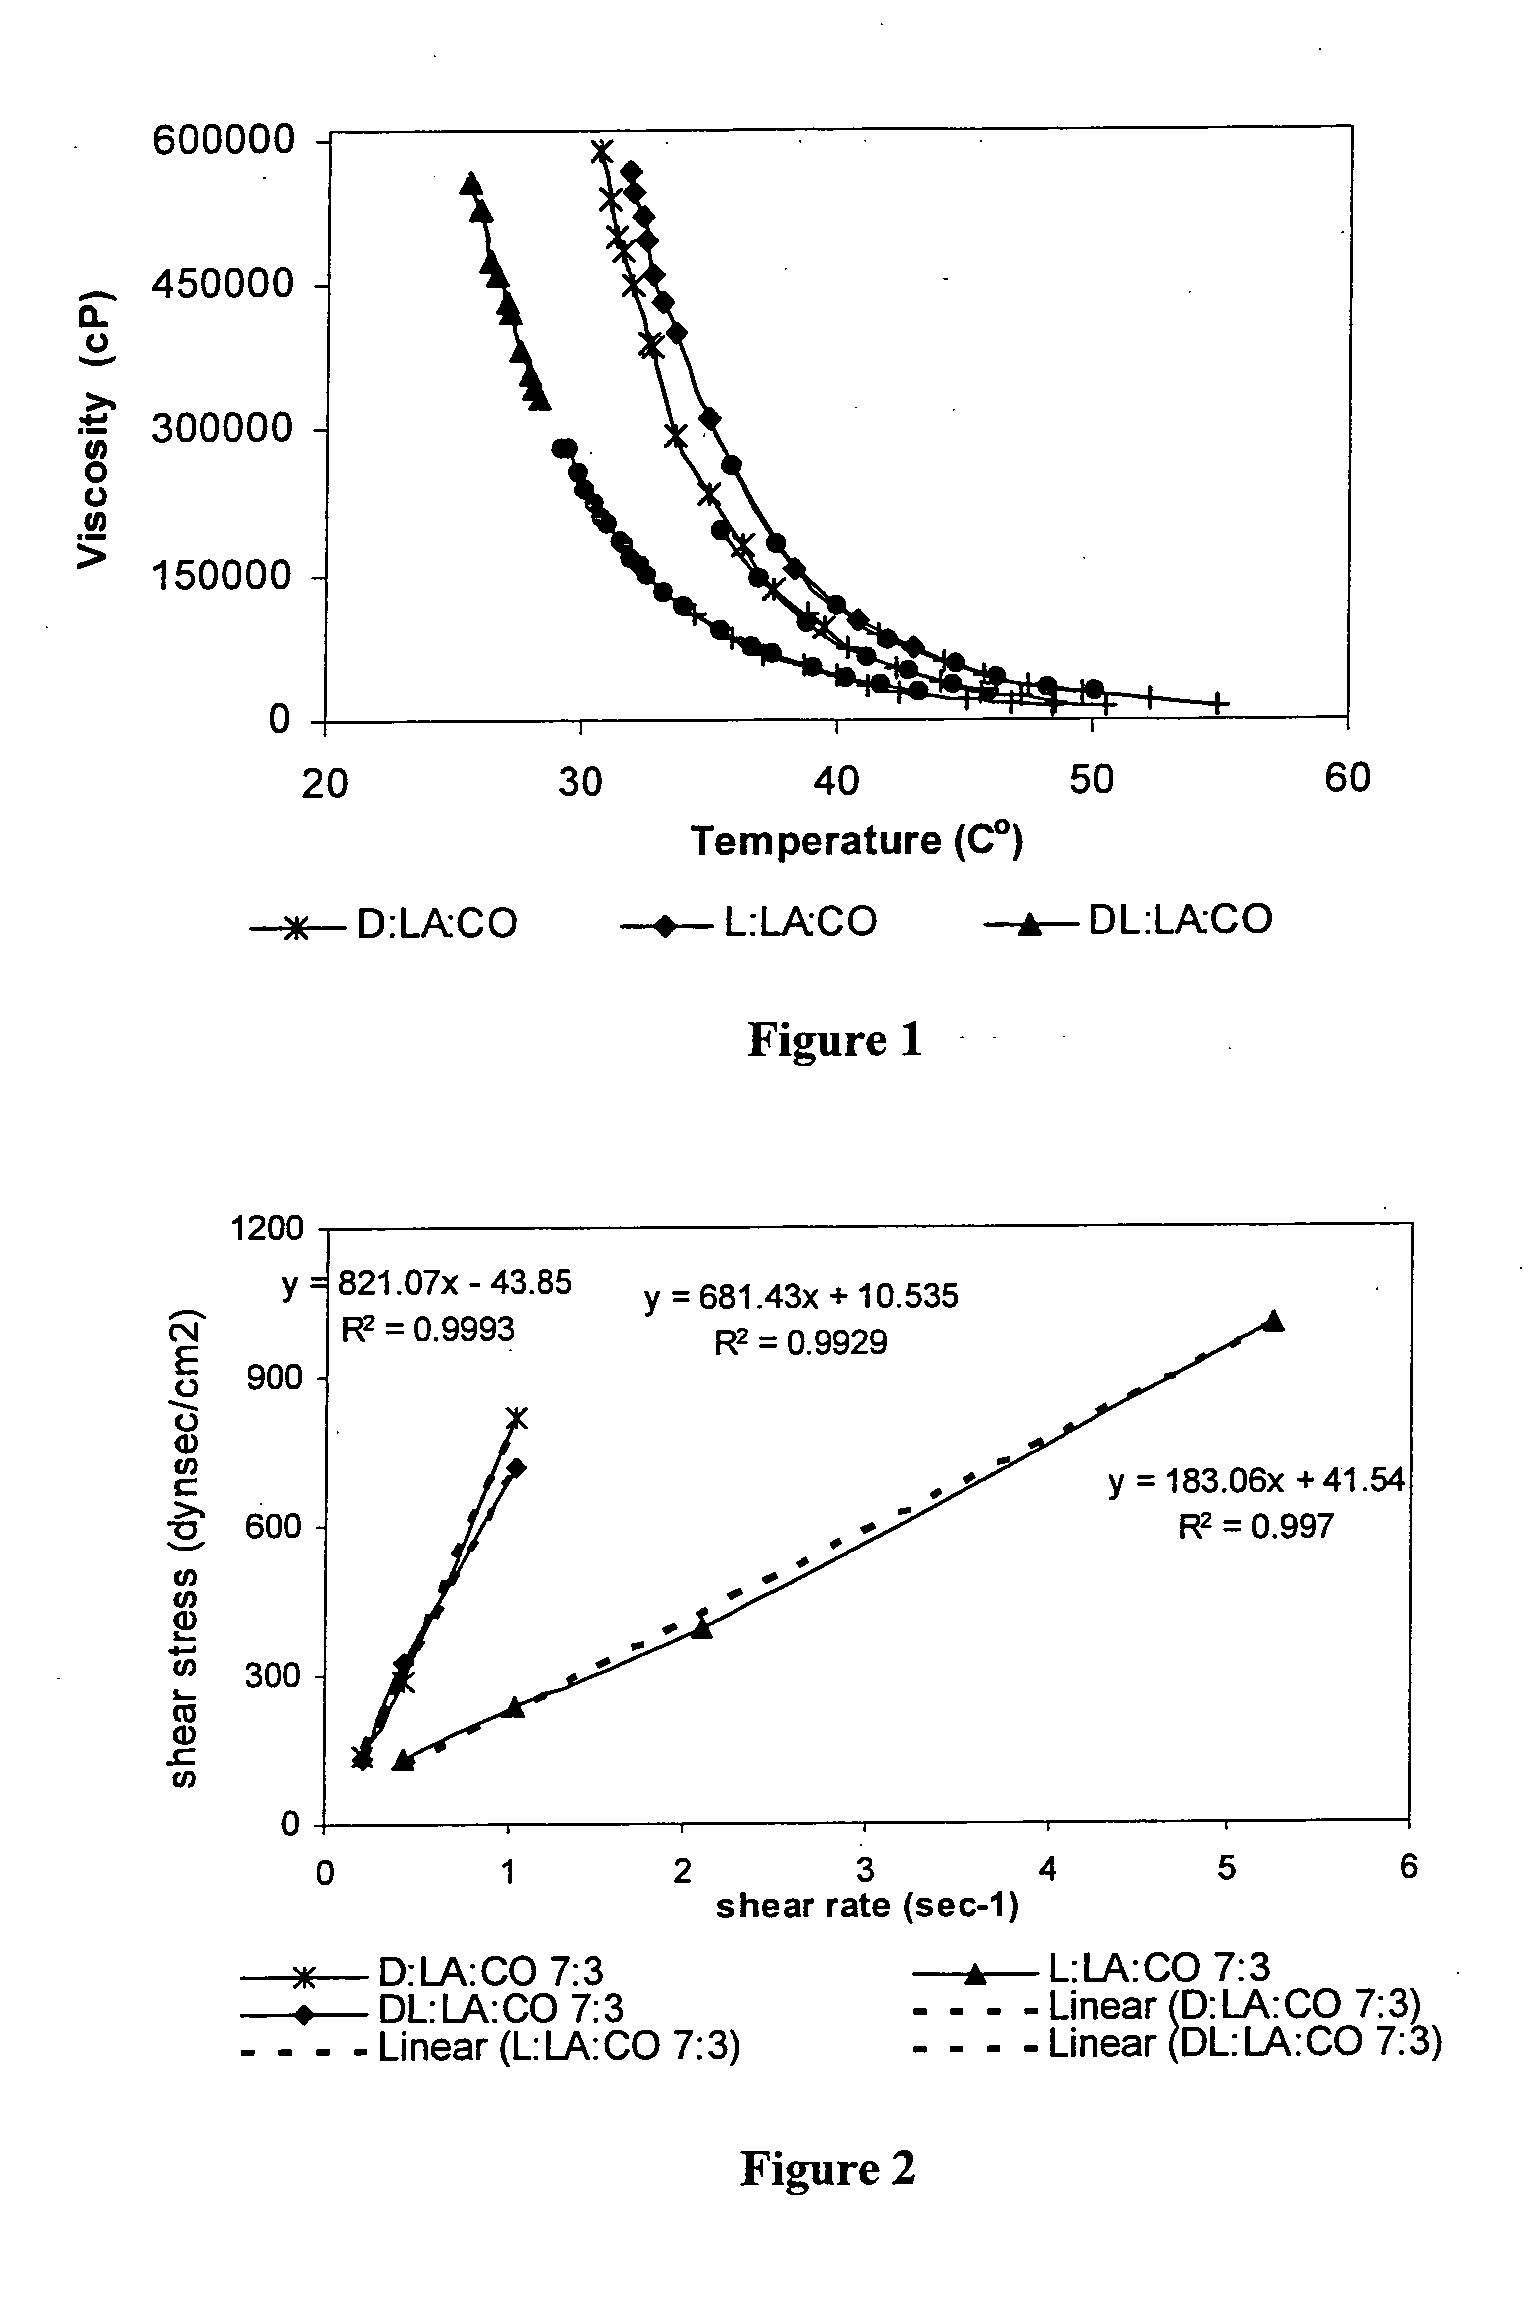 Injectable biodegradable polymer compositions for soft tissue repair and augmentation